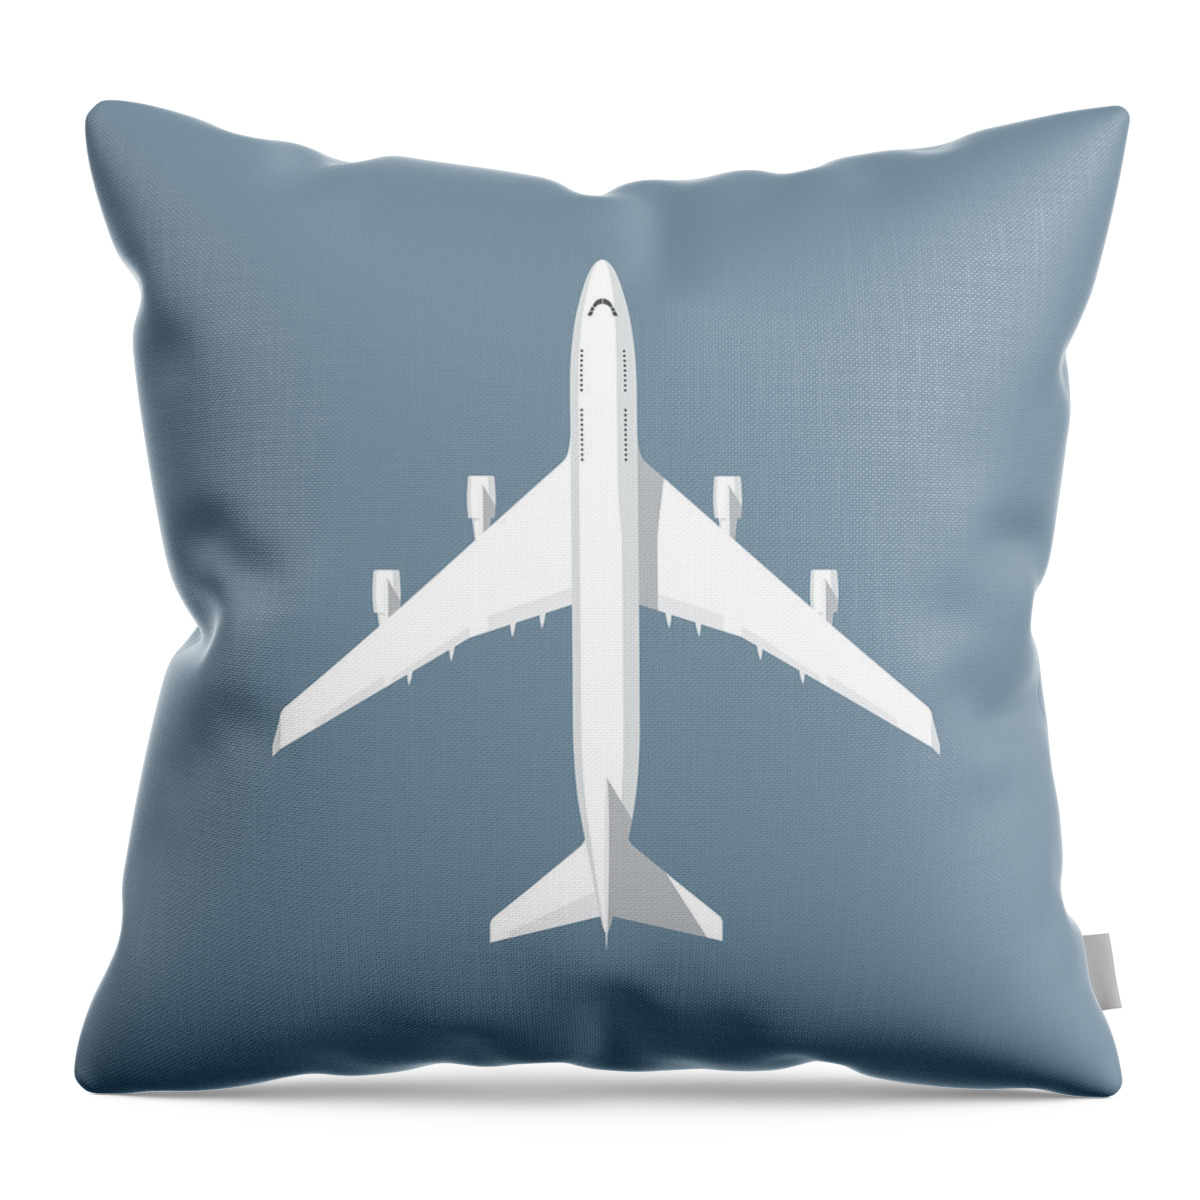 Airplane Throw Pillow featuring the digital art 747 Jumbo Jet Airliner Aircraft - Slate by Organic Synthesis